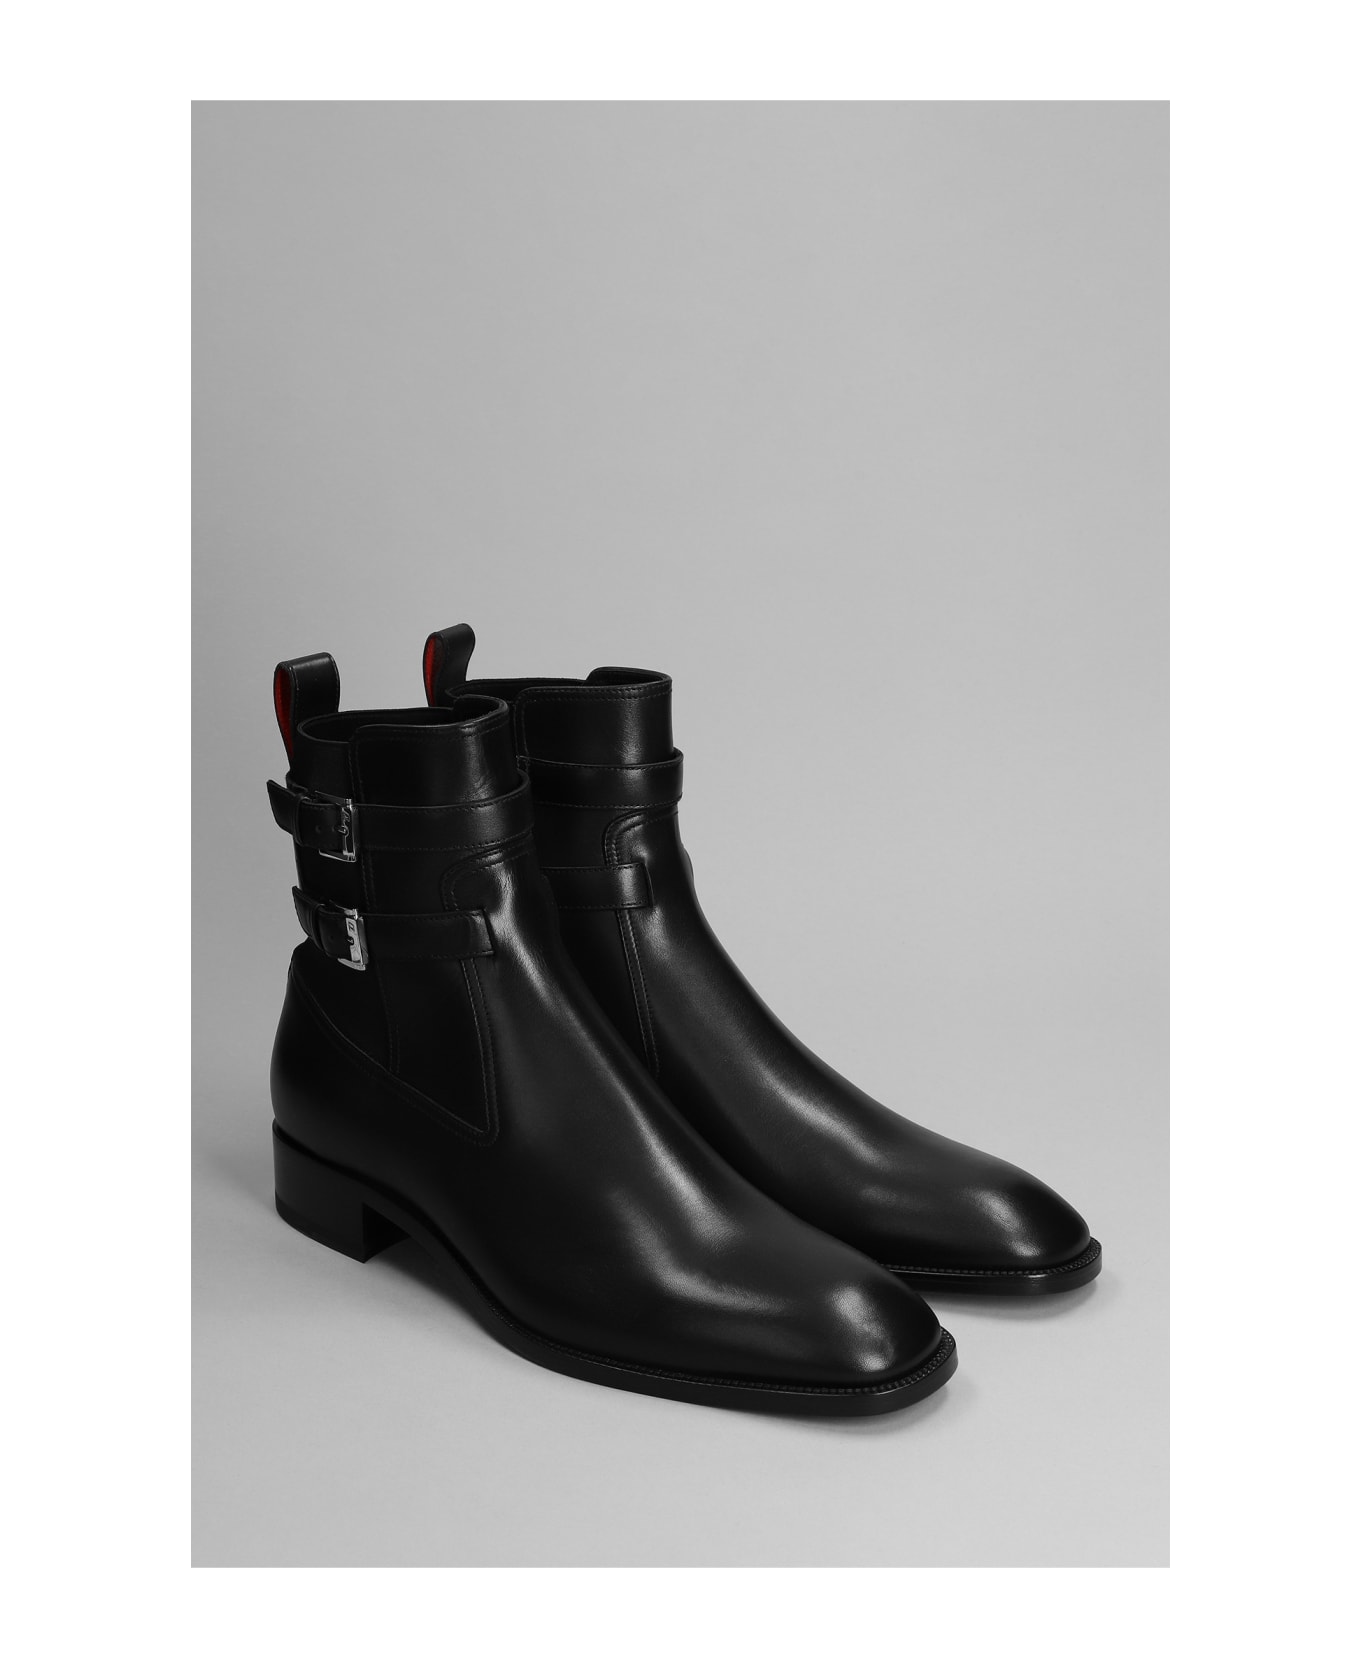 Christian Louboutin Sahni Horse Flat Ankle Boots In Black Leather - black ブーツ